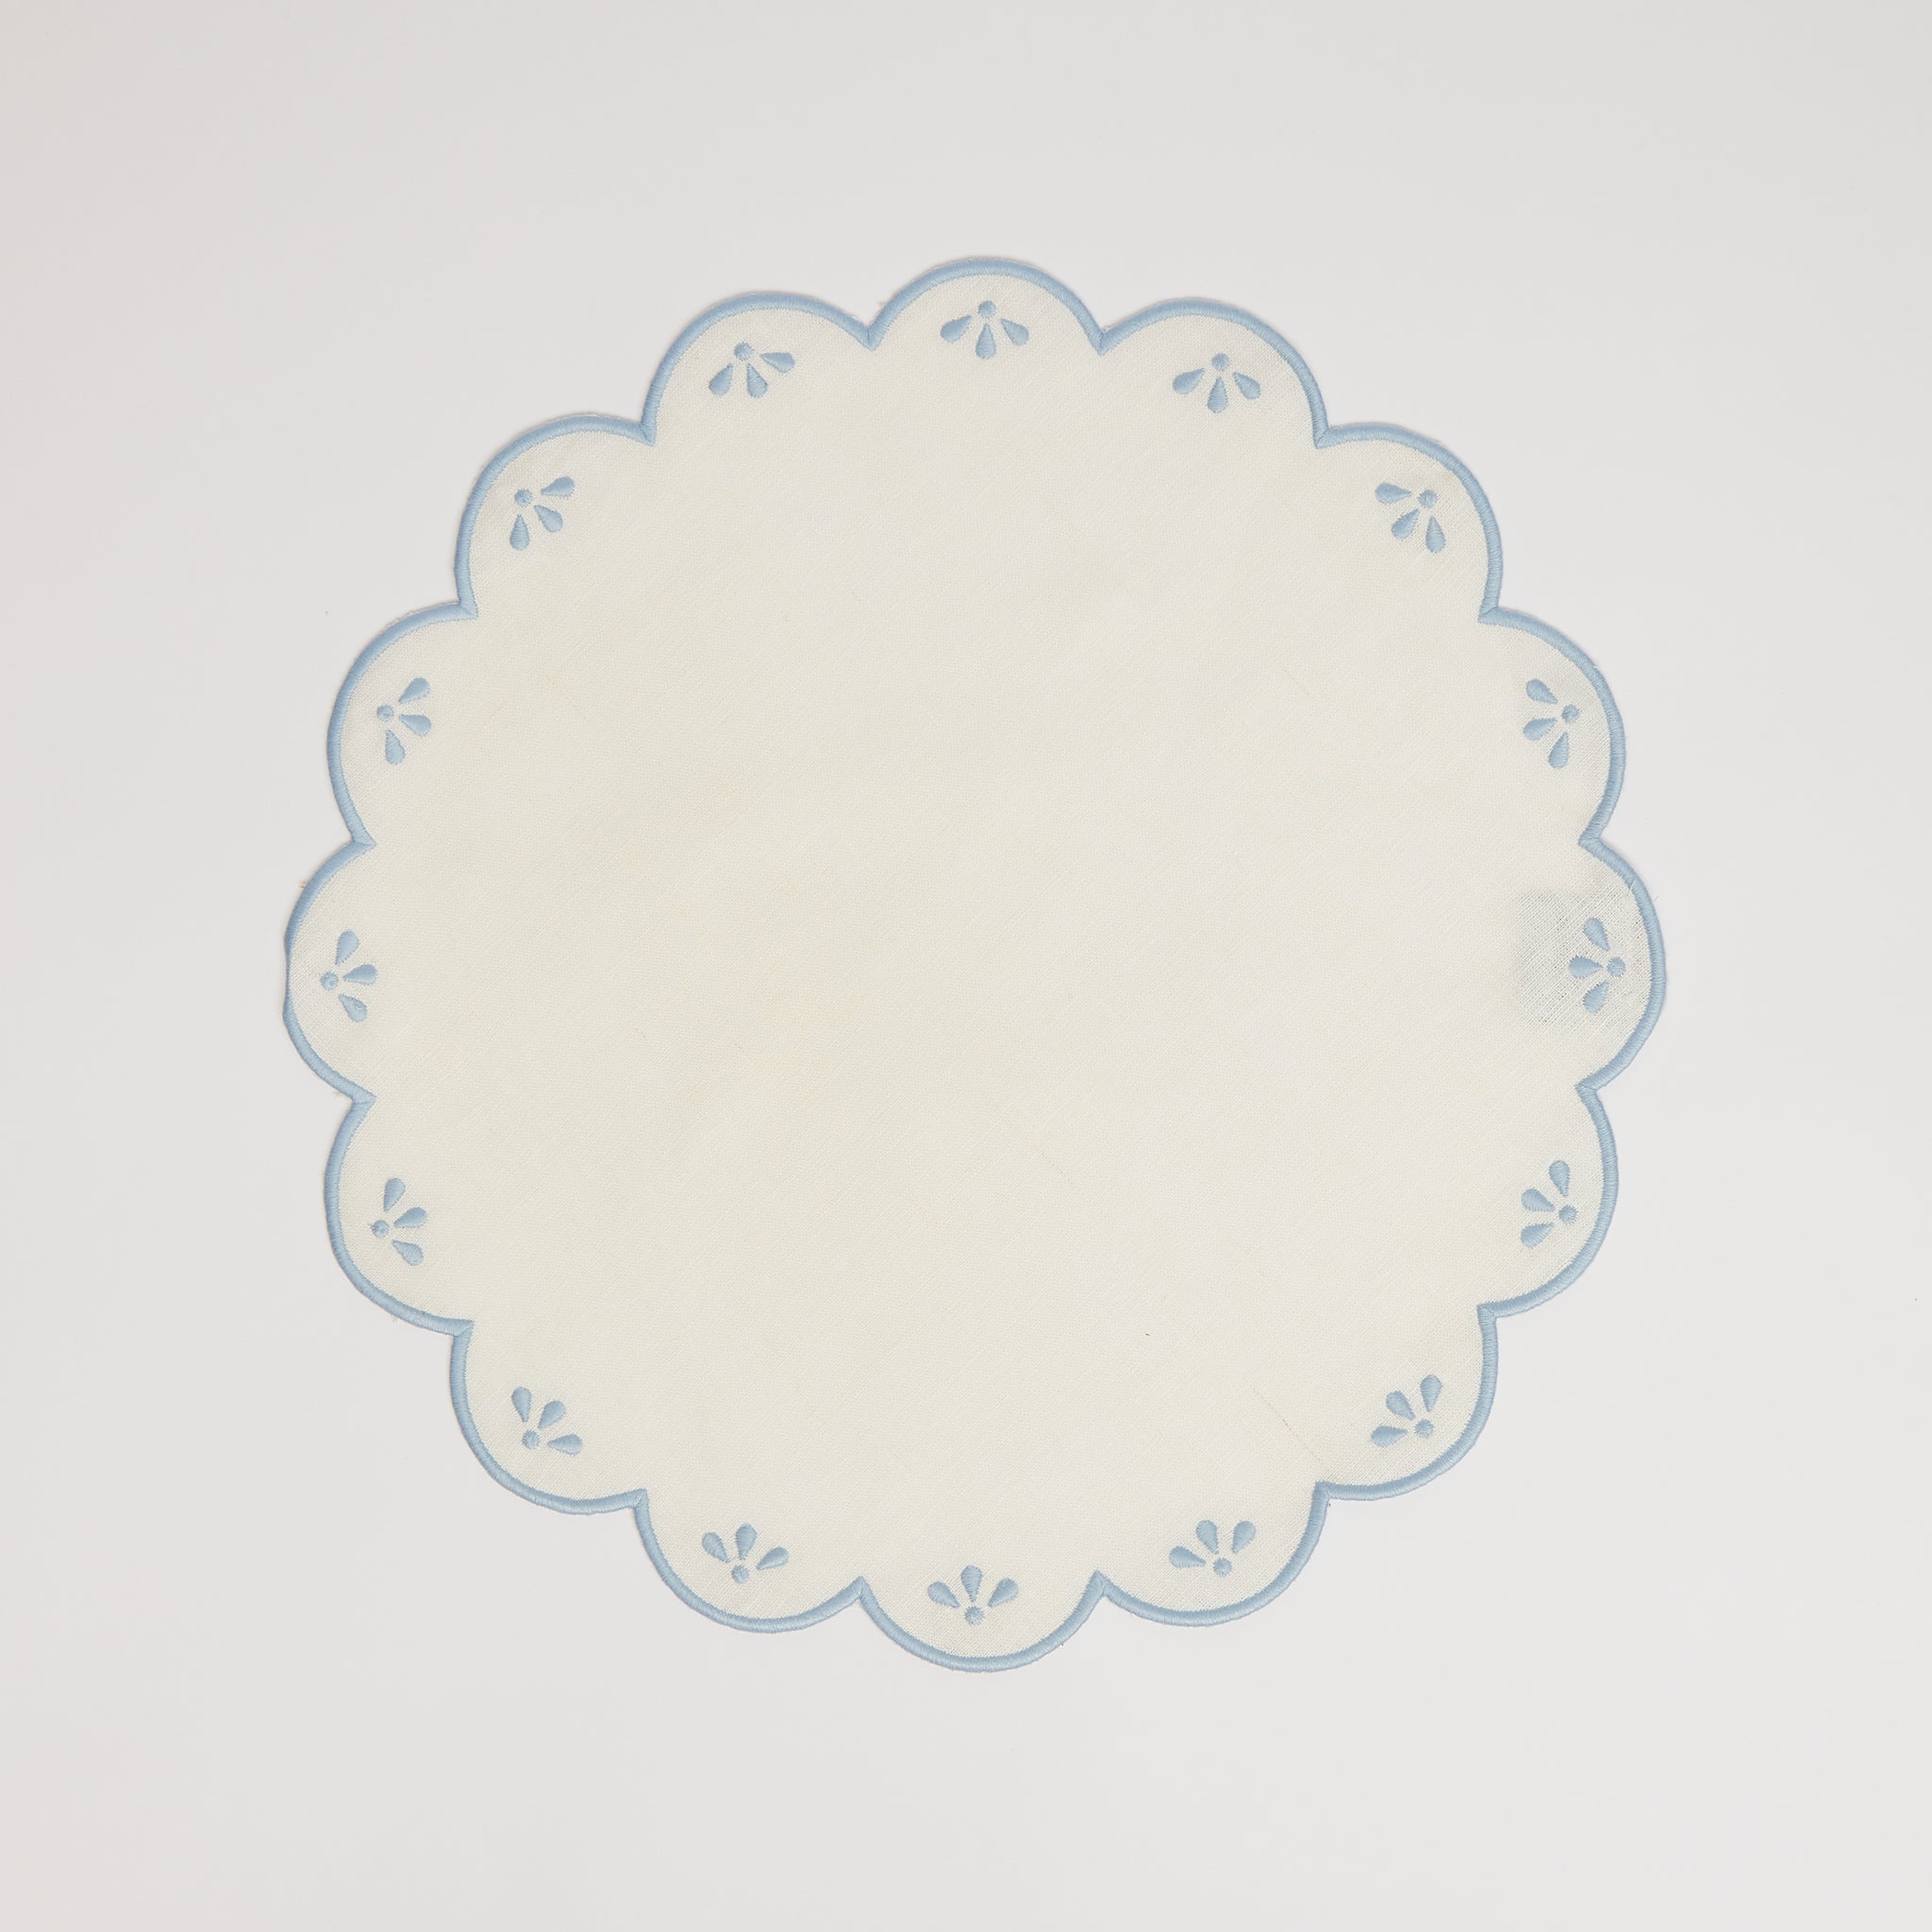 Peony White and Pale Blue Placemat (set of 4)